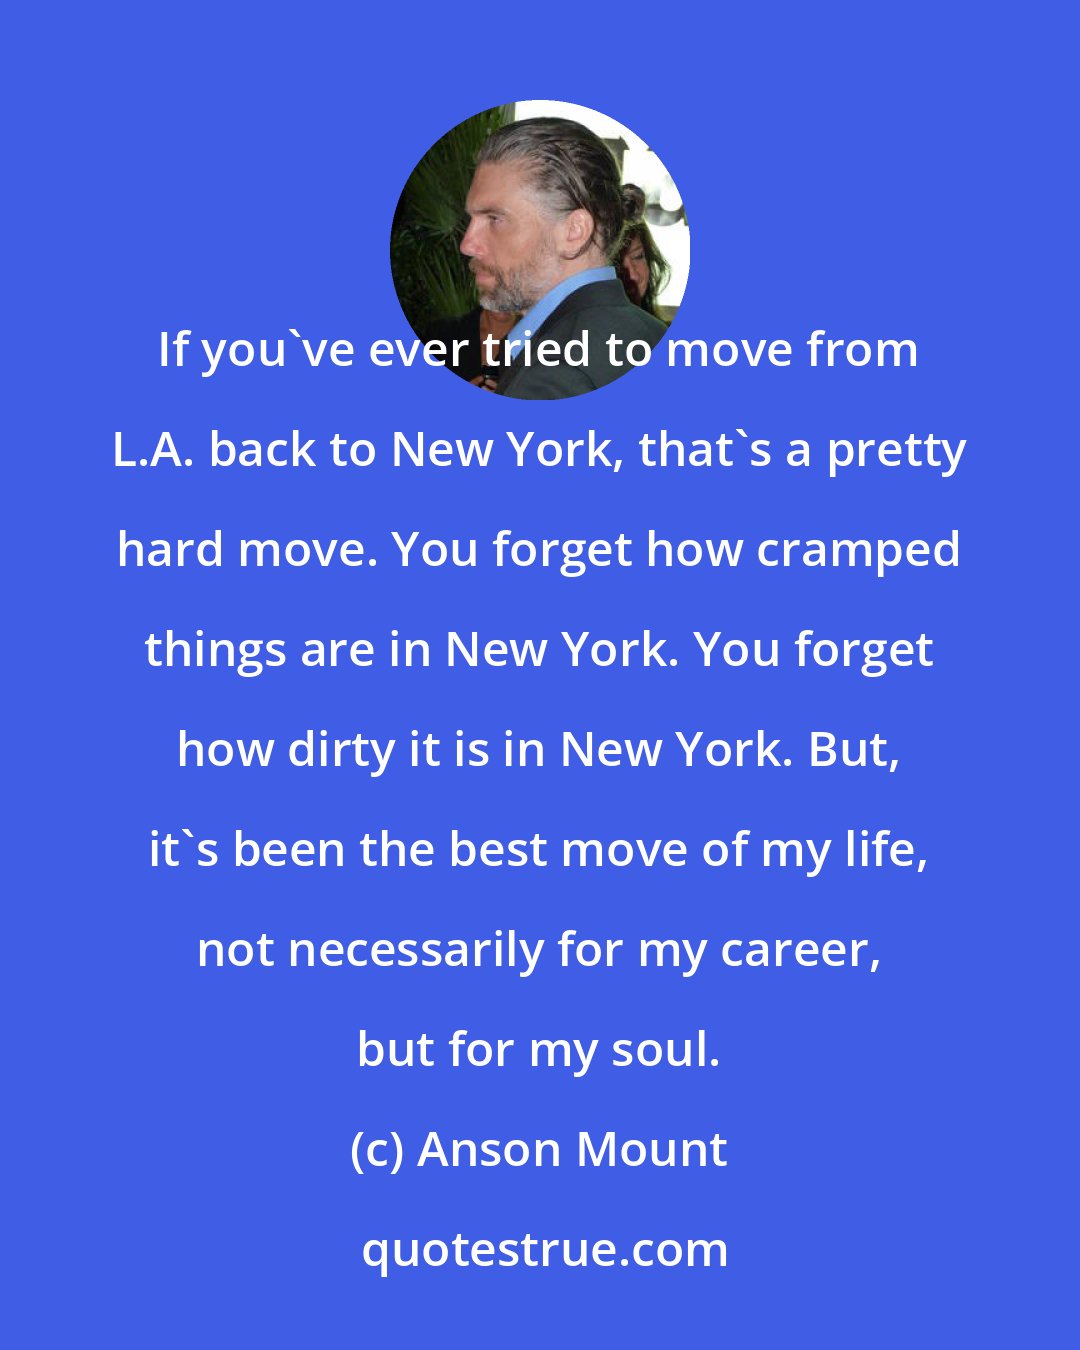 Anson Mount: If you've ever tried to move from L.A. back to New York, that's a pretty hard move. You forget how cramped things are in New York. You forget how dirty it is in New York. But, it's been the best move of my life, not necessarily for my career, but for my soul.